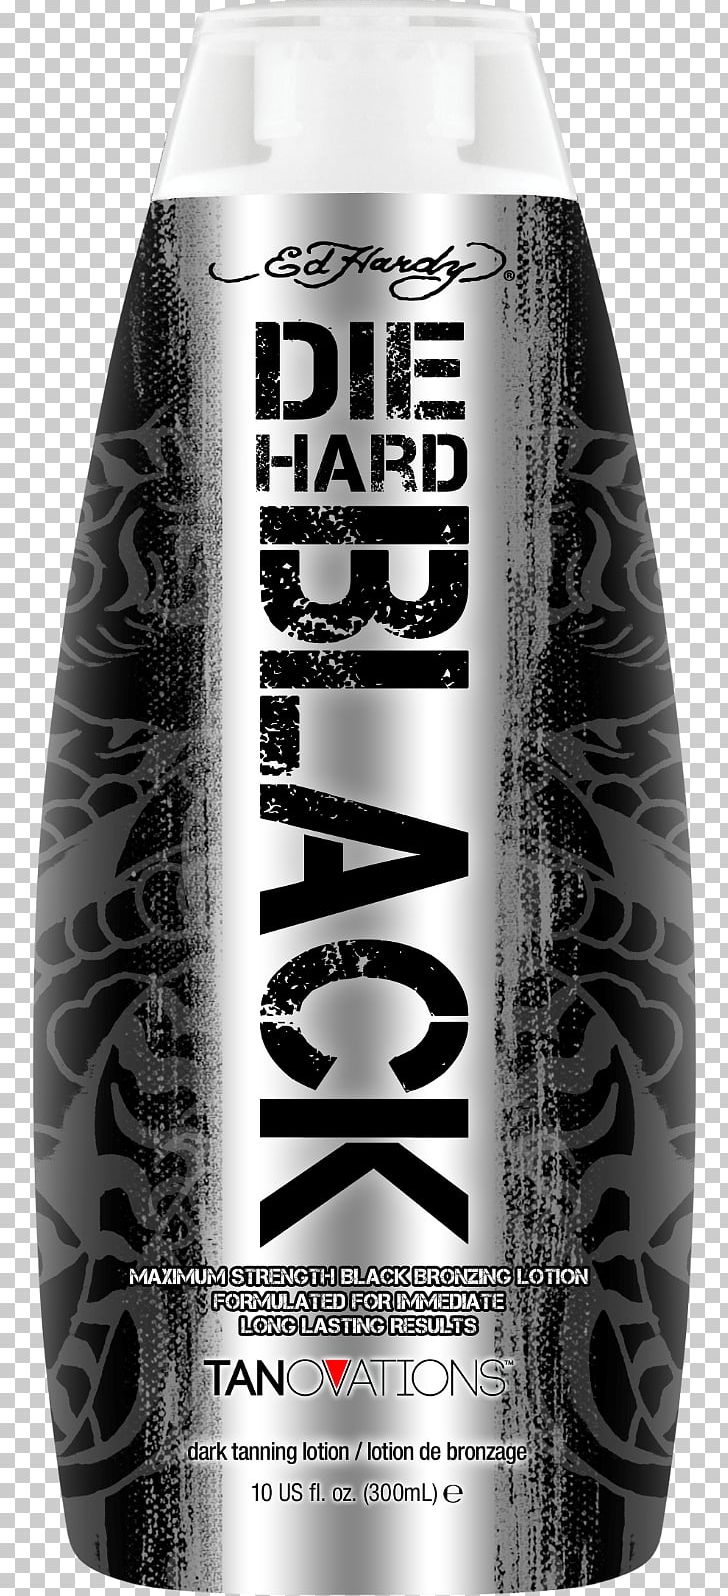 Indoor Tanning Lotion Sunscreen Sun Tanning Ed Hardy PNG, Clipart, Aluminum Can, Black And White, Bottle, Bronzer, Christian Audigier Free PNG Download